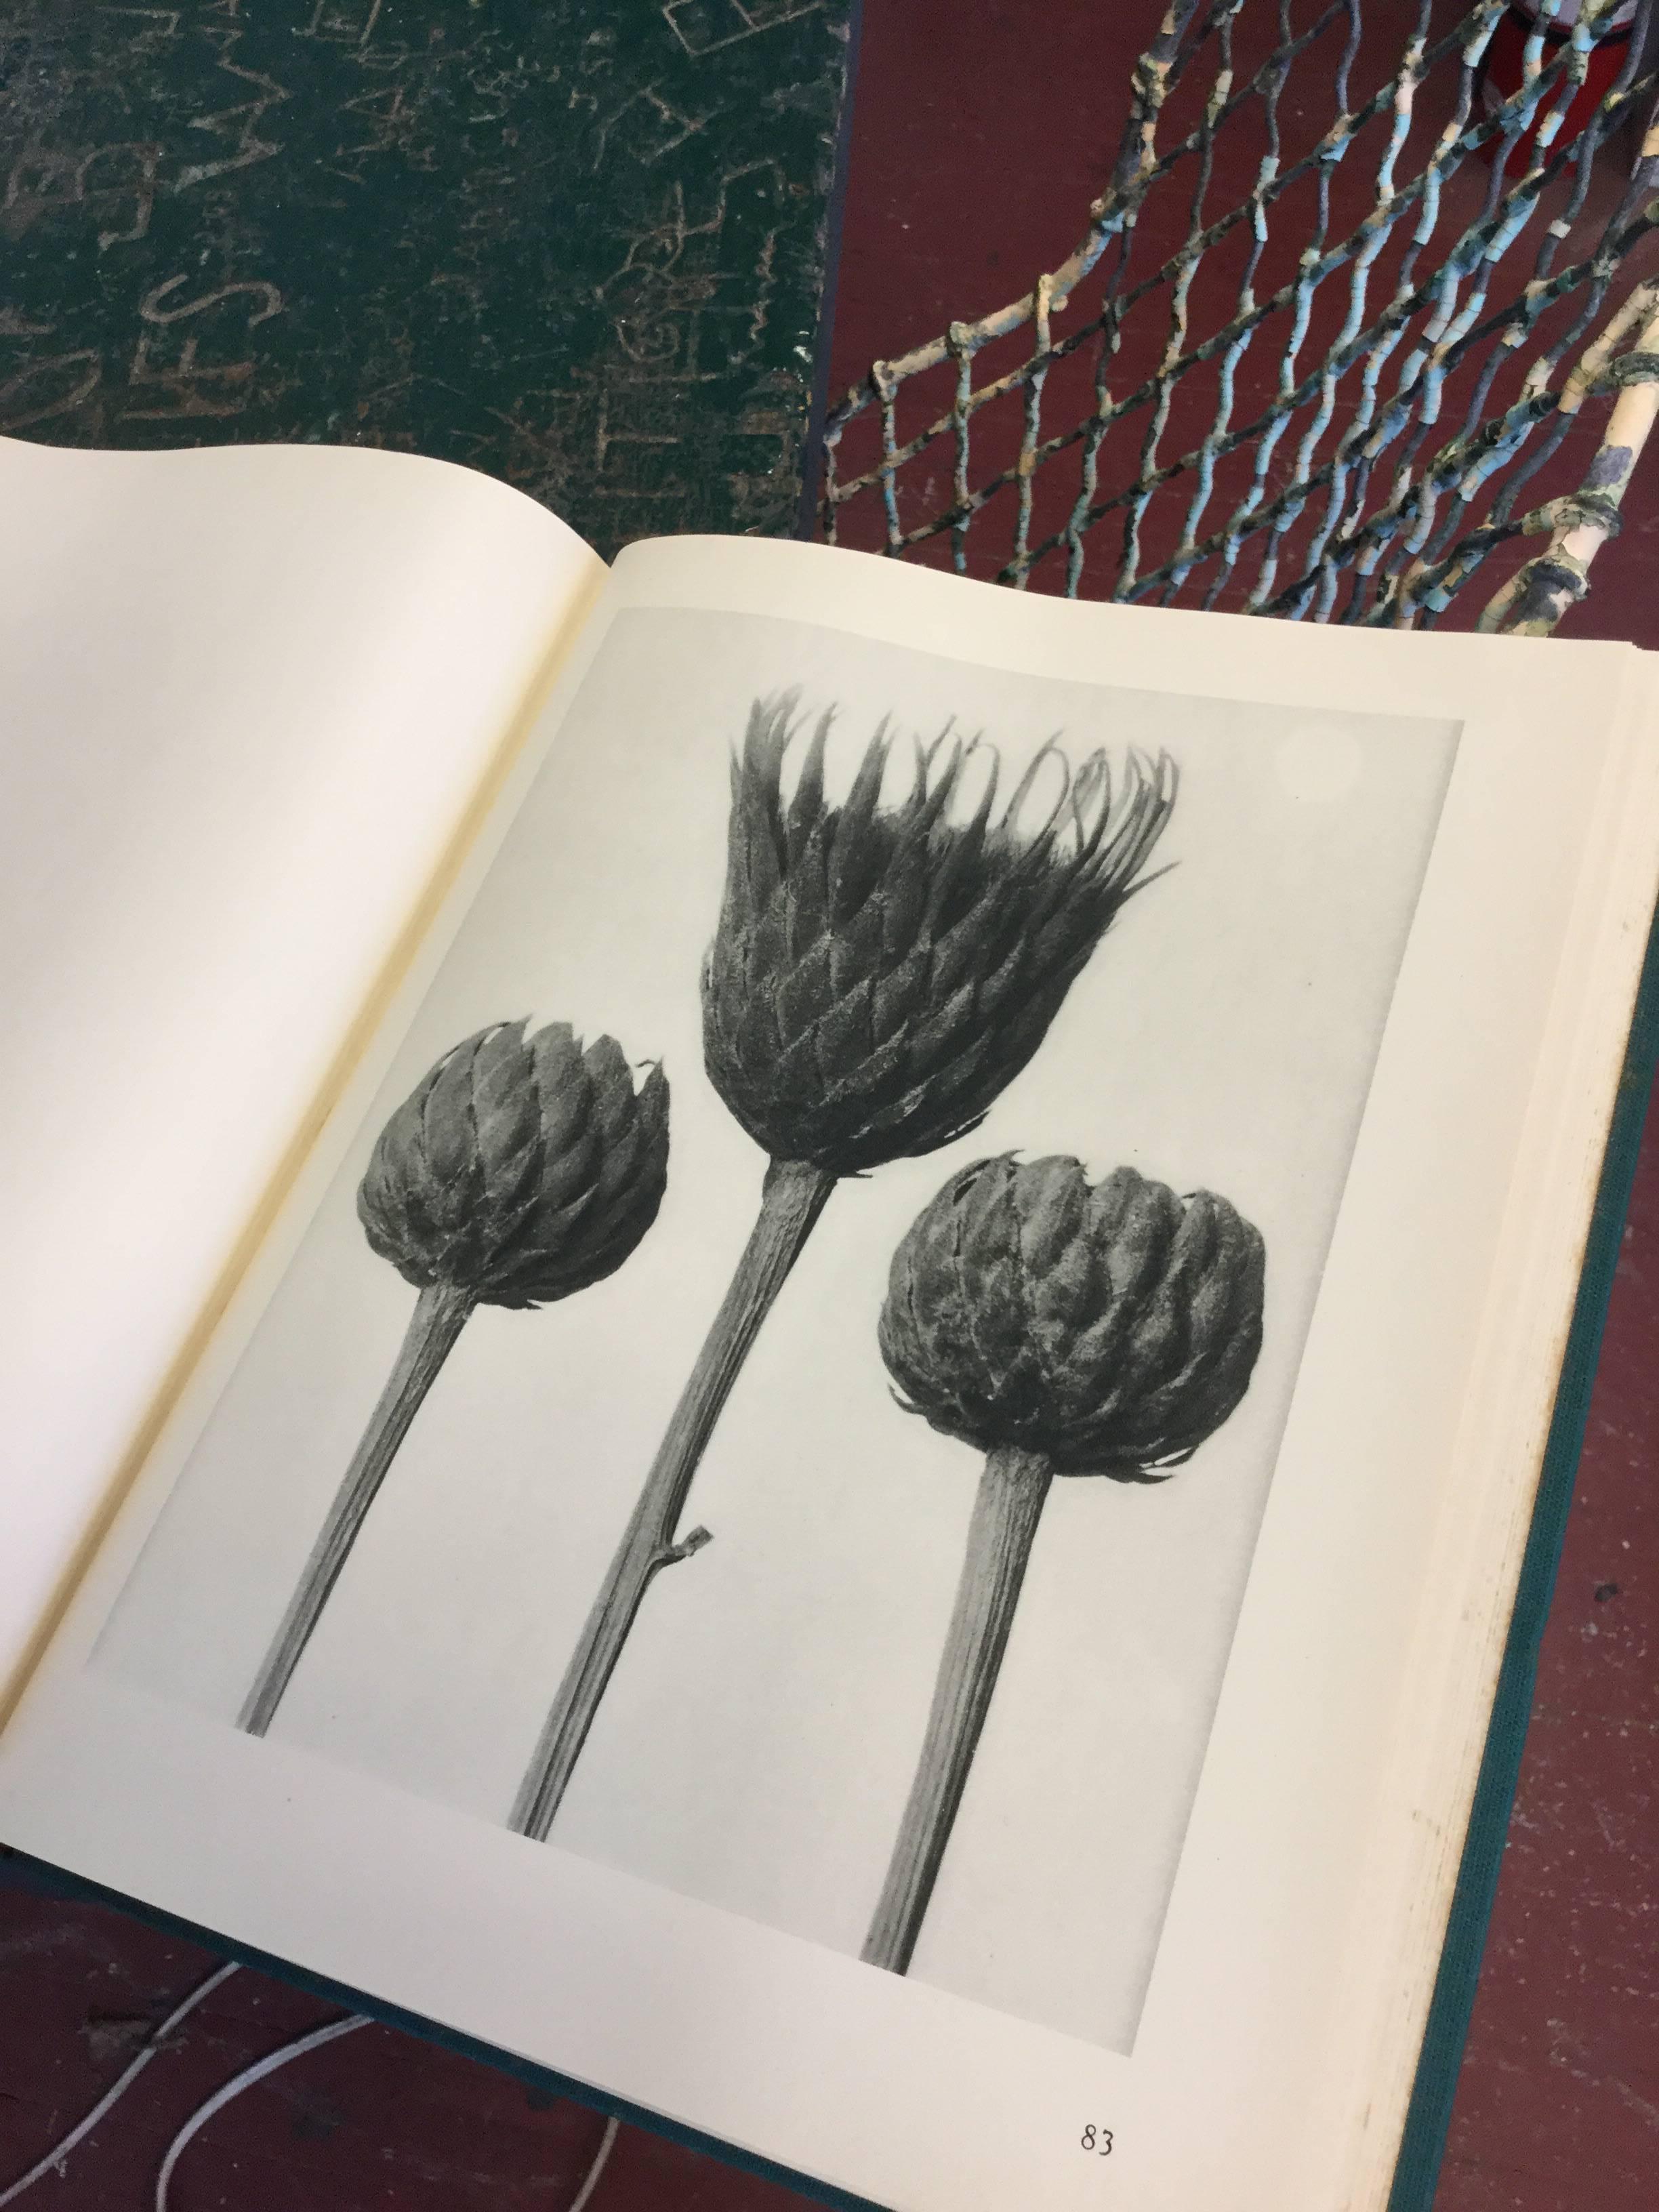 First edition Karl Blossfeldt Photogravure. The first edition has the best resolution. Classic images that will always transcend what's 